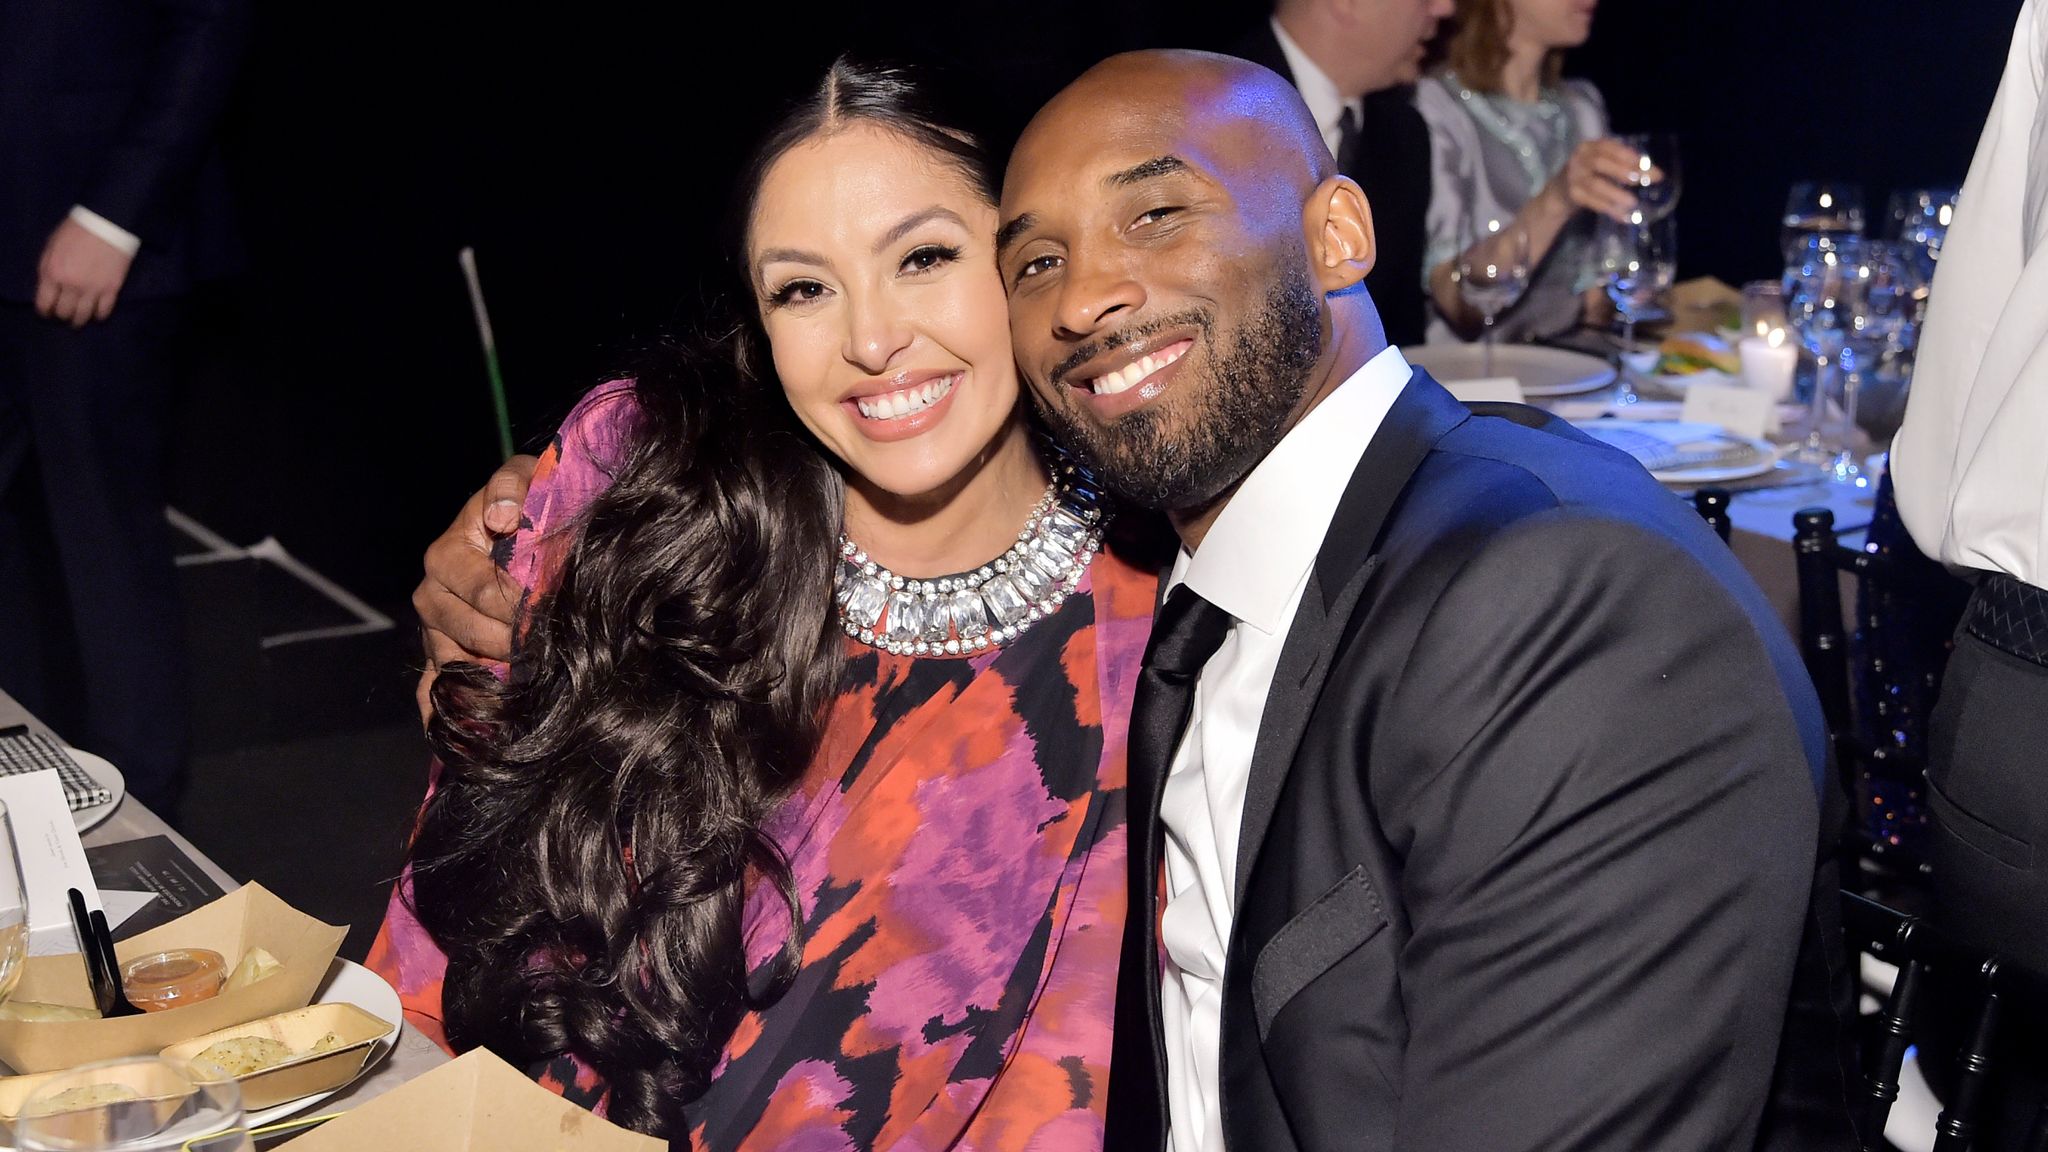 Vanessa Bryant cries after witness says he was shown Kobe crash photos